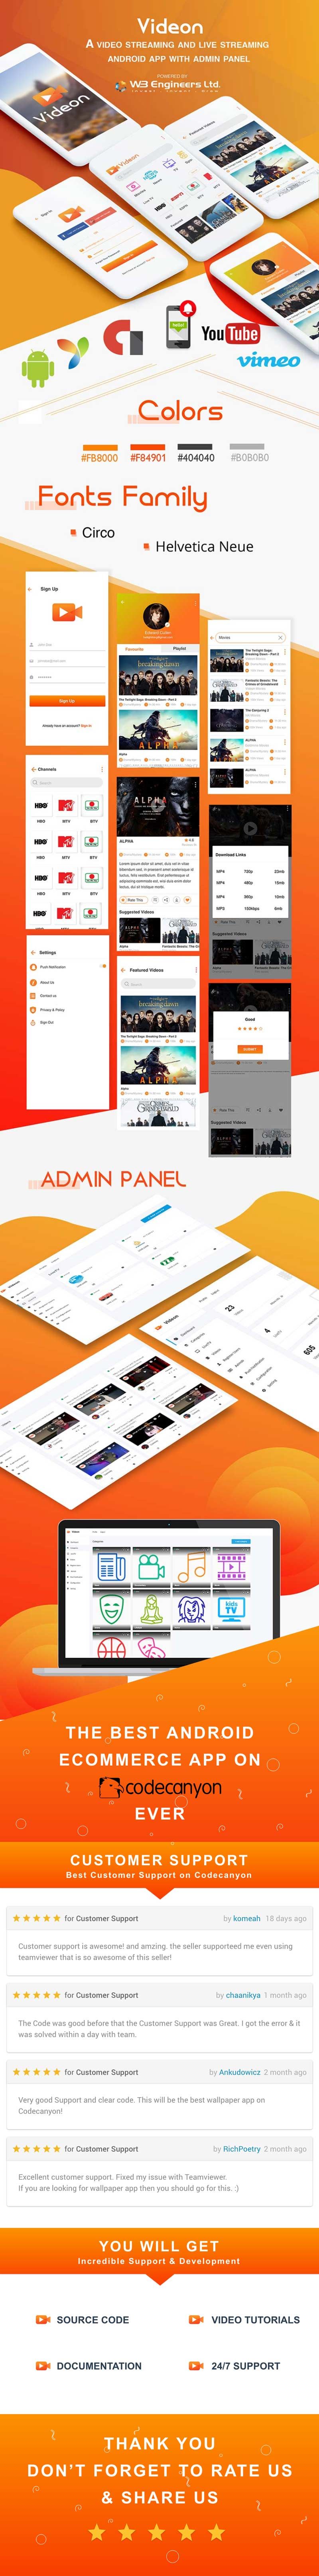 Videon - A video streaming android app with admin panel - 6